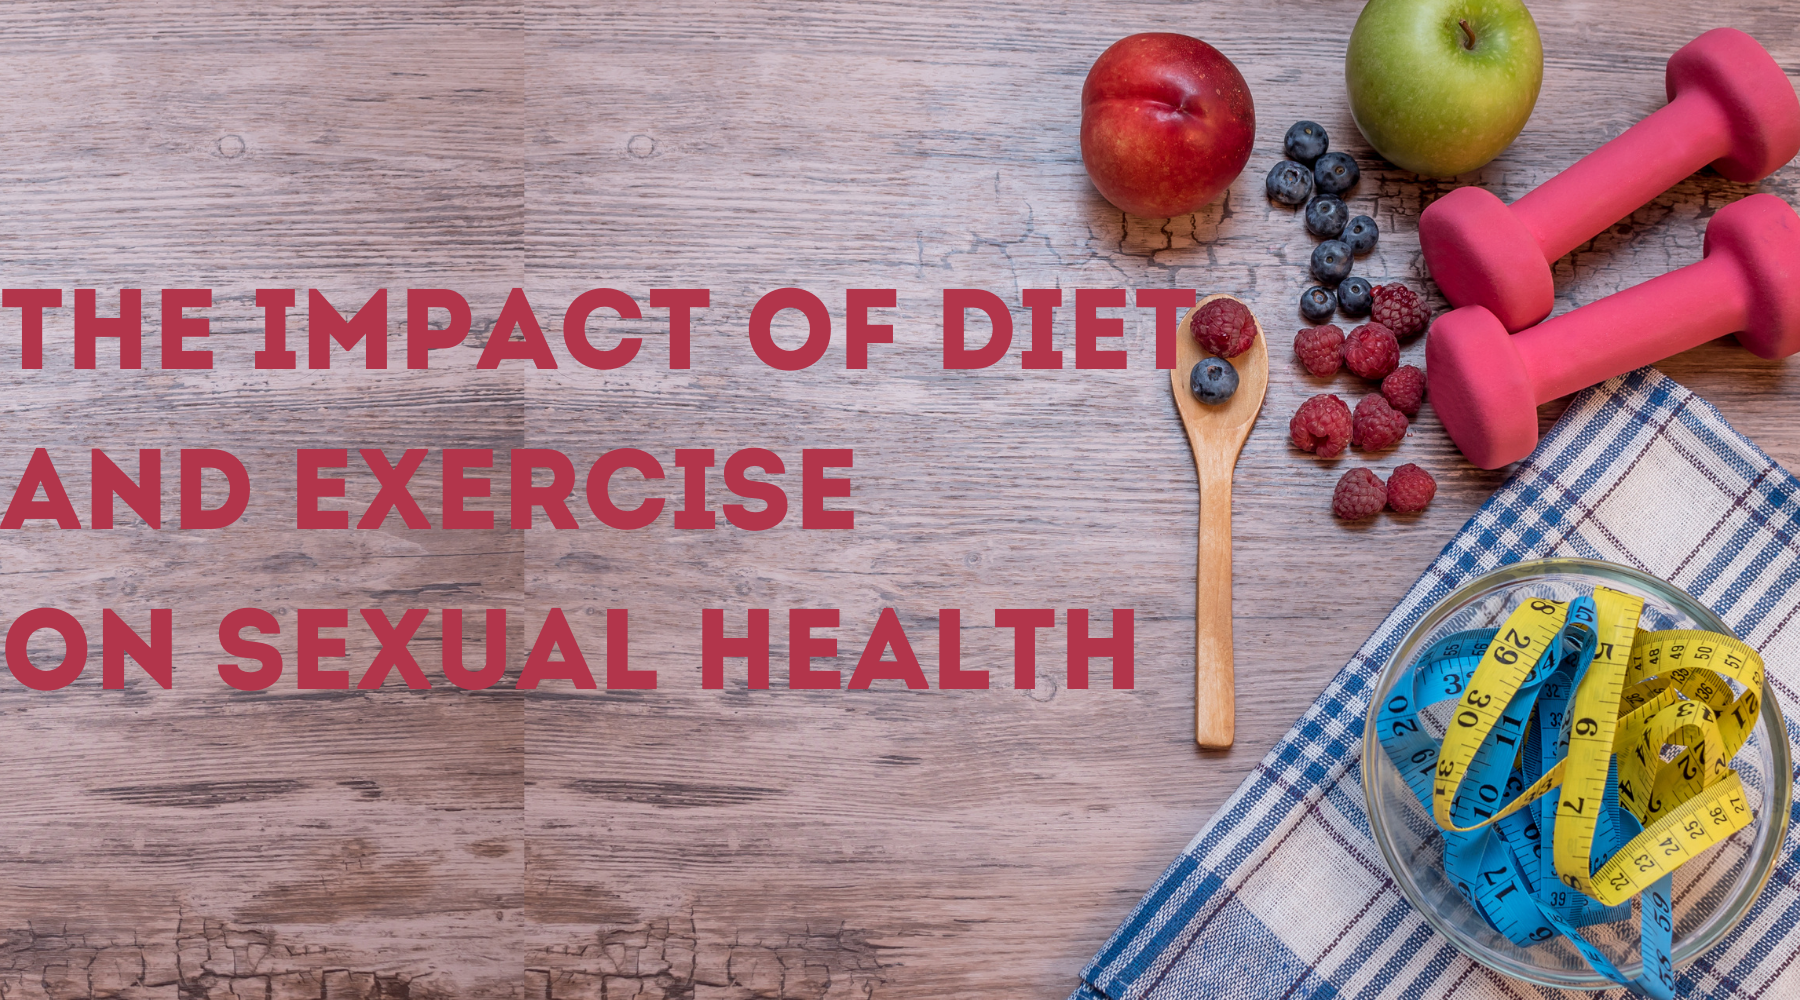 THE IMPACT OF DIET AND EXERCISE ON SEXUAL HEALTH